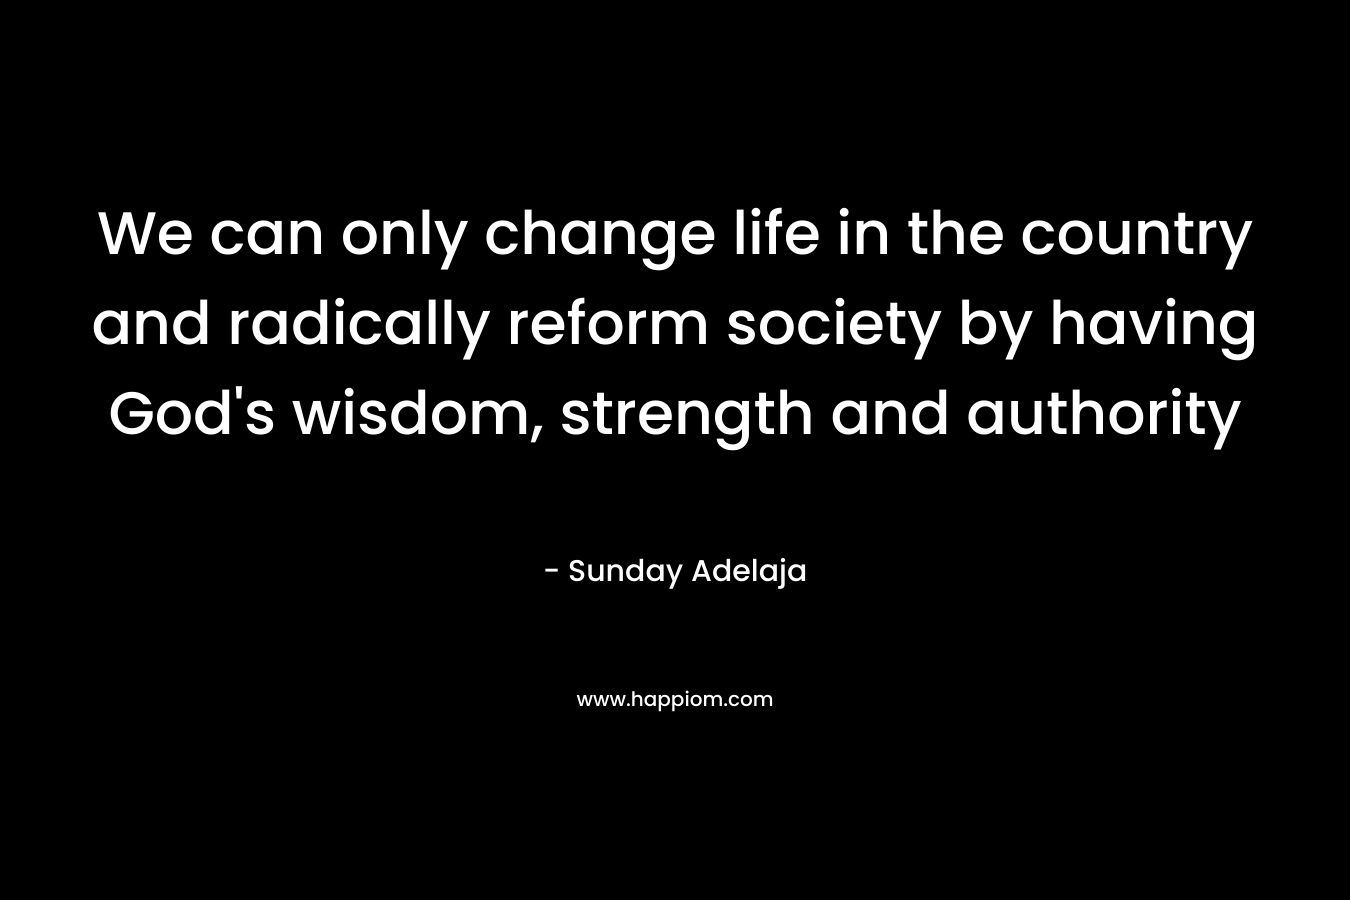 We can only change life in the country and radically reform society by having God’s wisdom, strength and authority – Sunday Adelaja